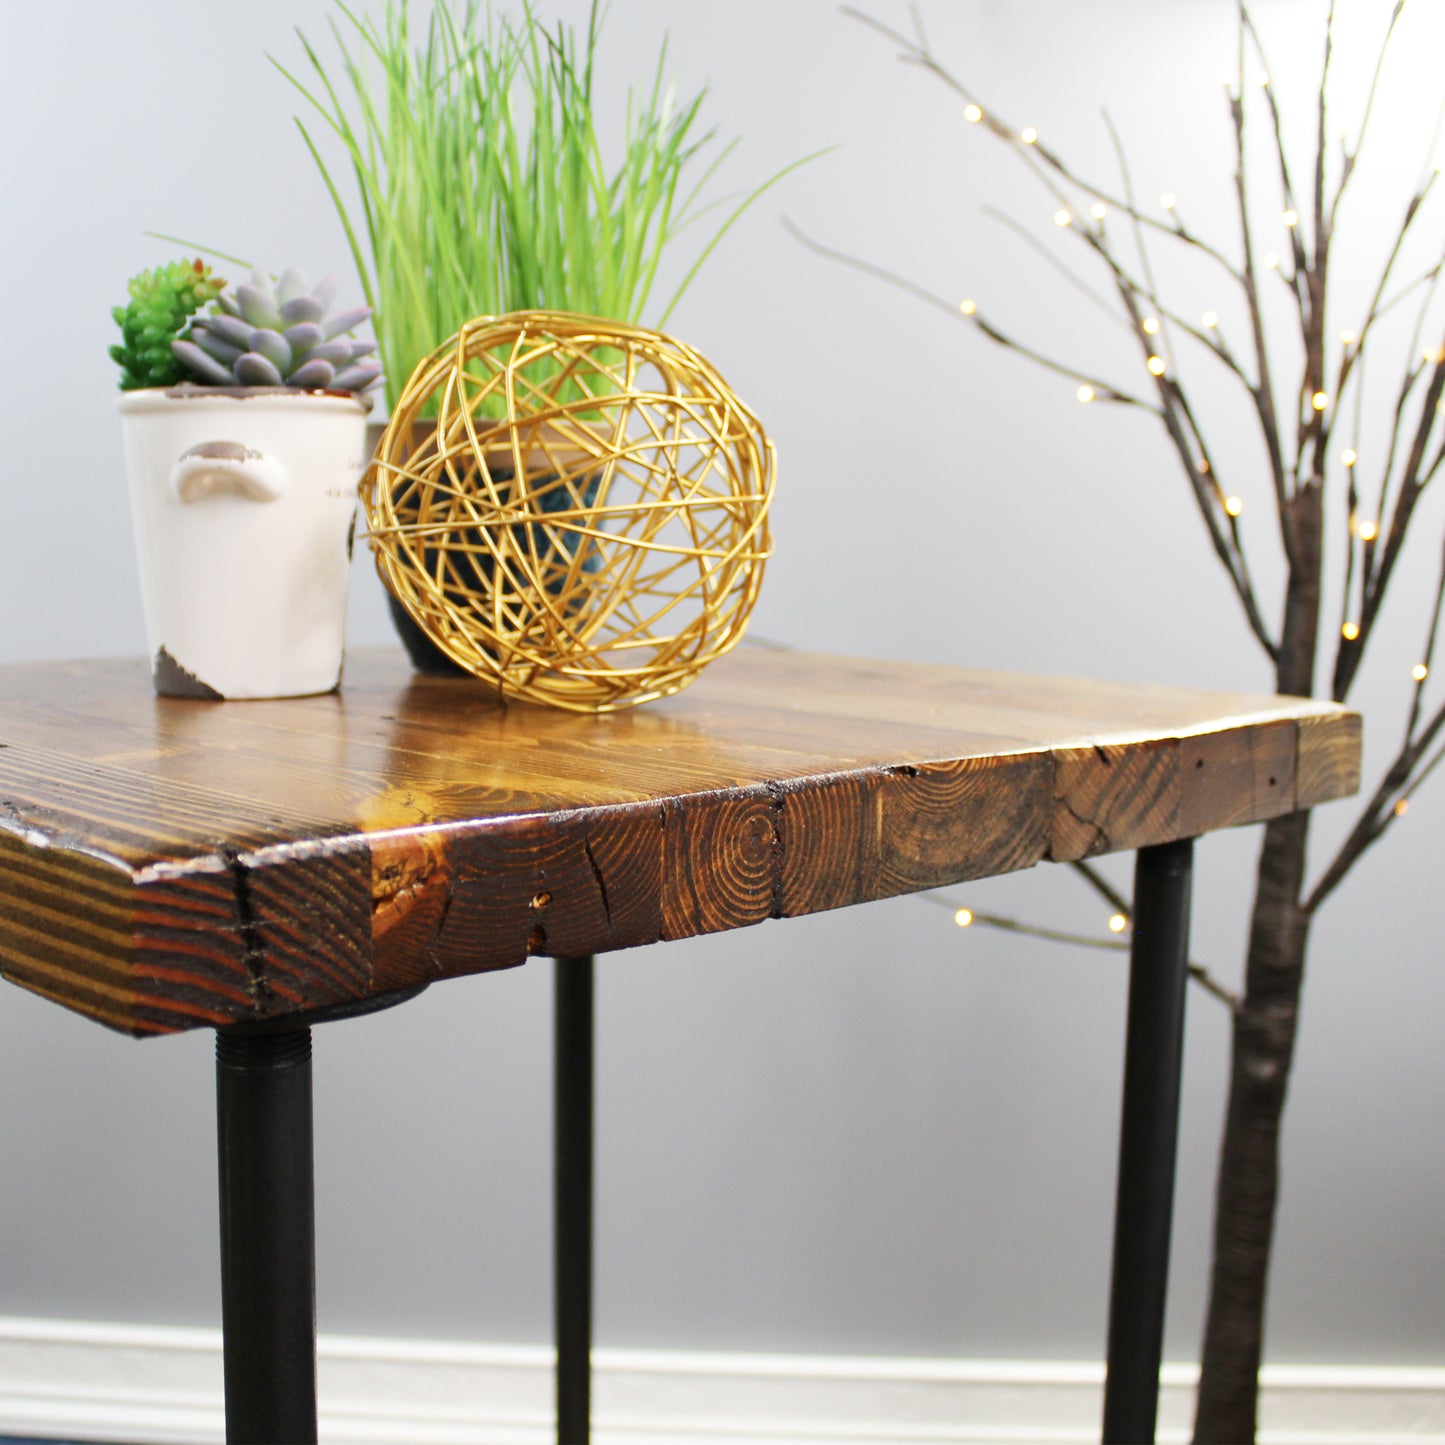 Natural Geo Dublin Rustic Pipe Wooden End Table